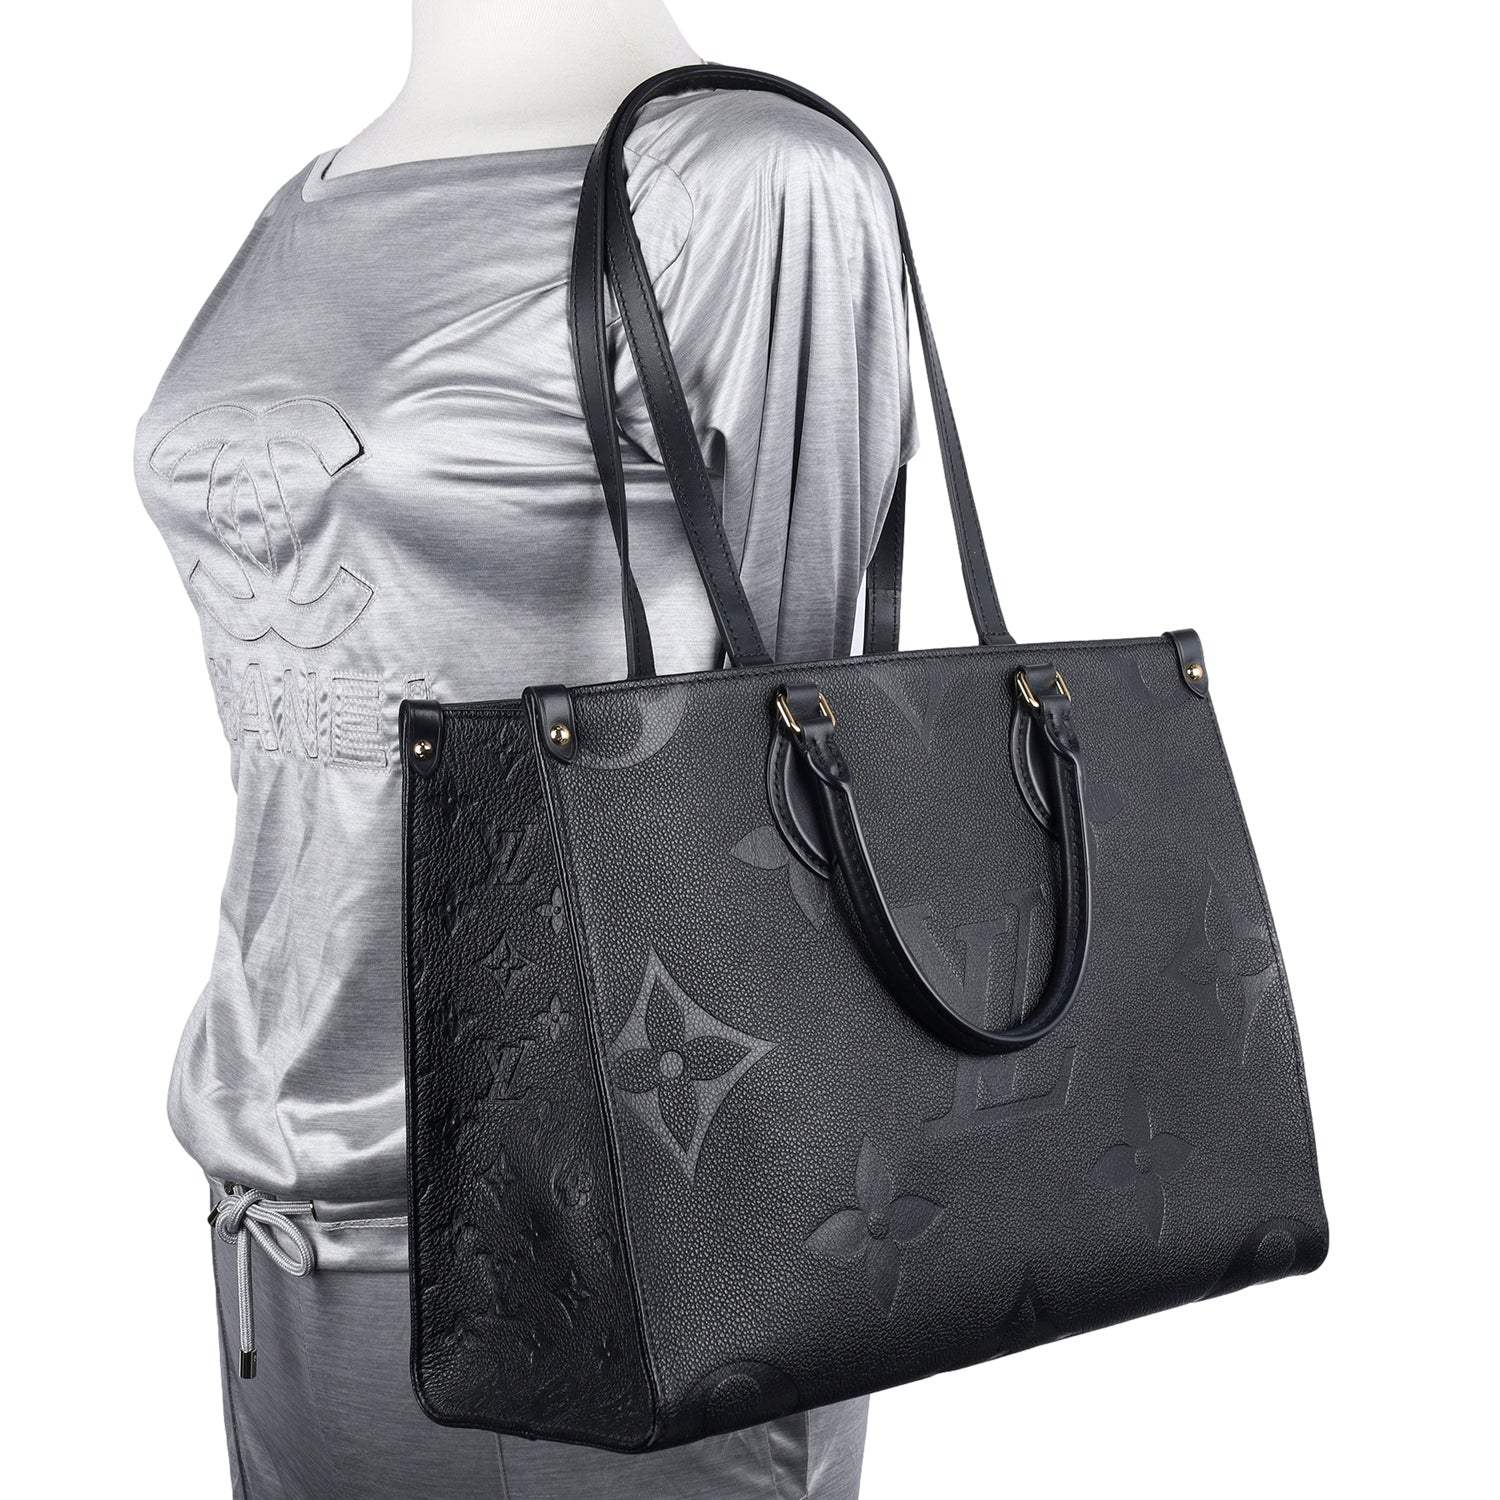 Louis Vuitton Pre-owned OnTheGo mm Tote Bag - White